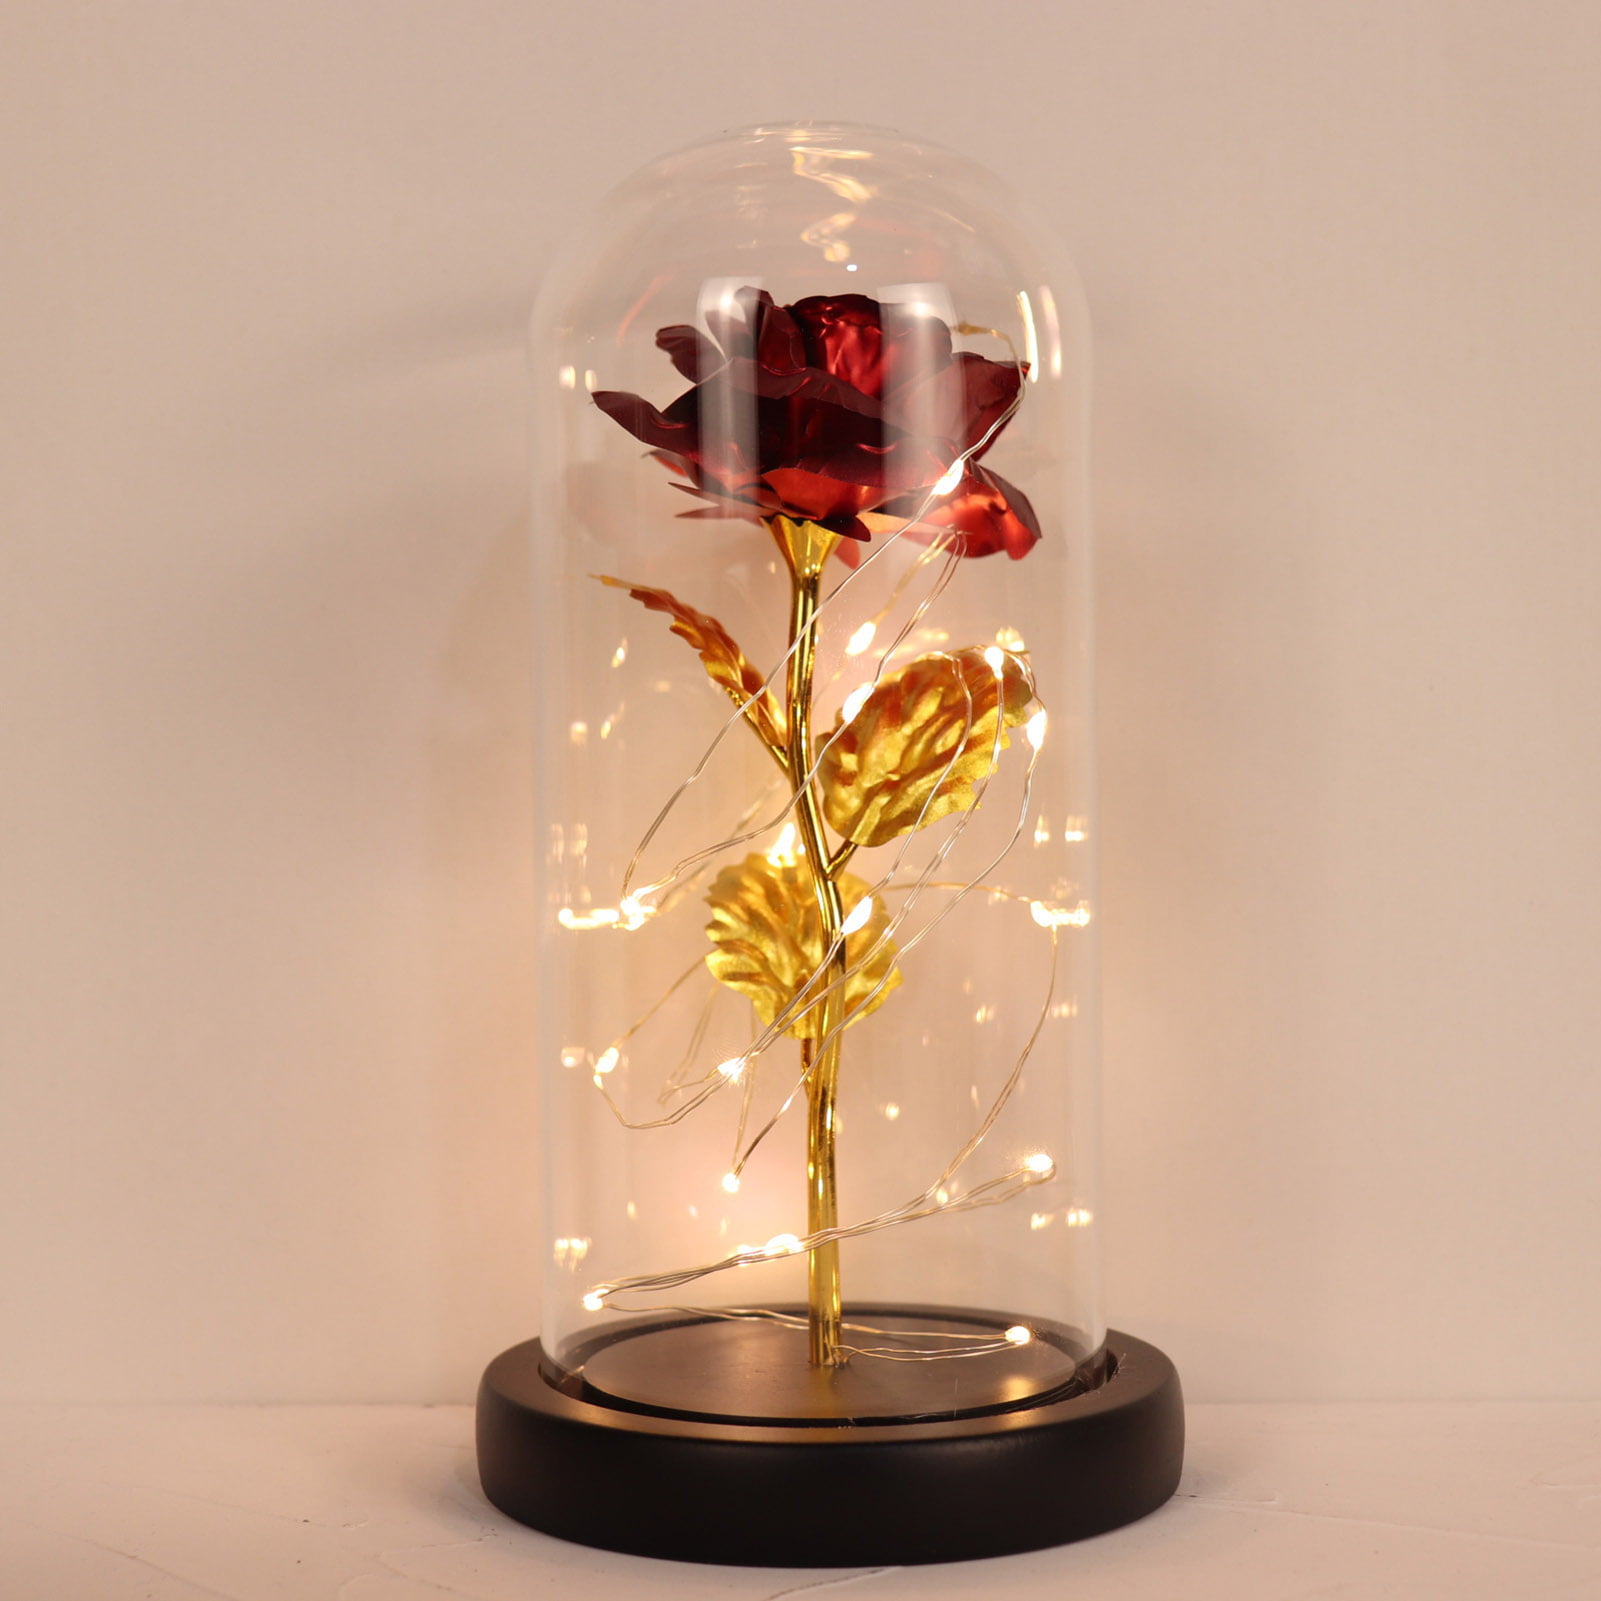 Beauty and The Beast Rose Valentines Day Flowers The Bionic Flower Gold Foil Rose Birthday Gift Glass Cover Mother's Day Chinese Valentine's Day Decorations 